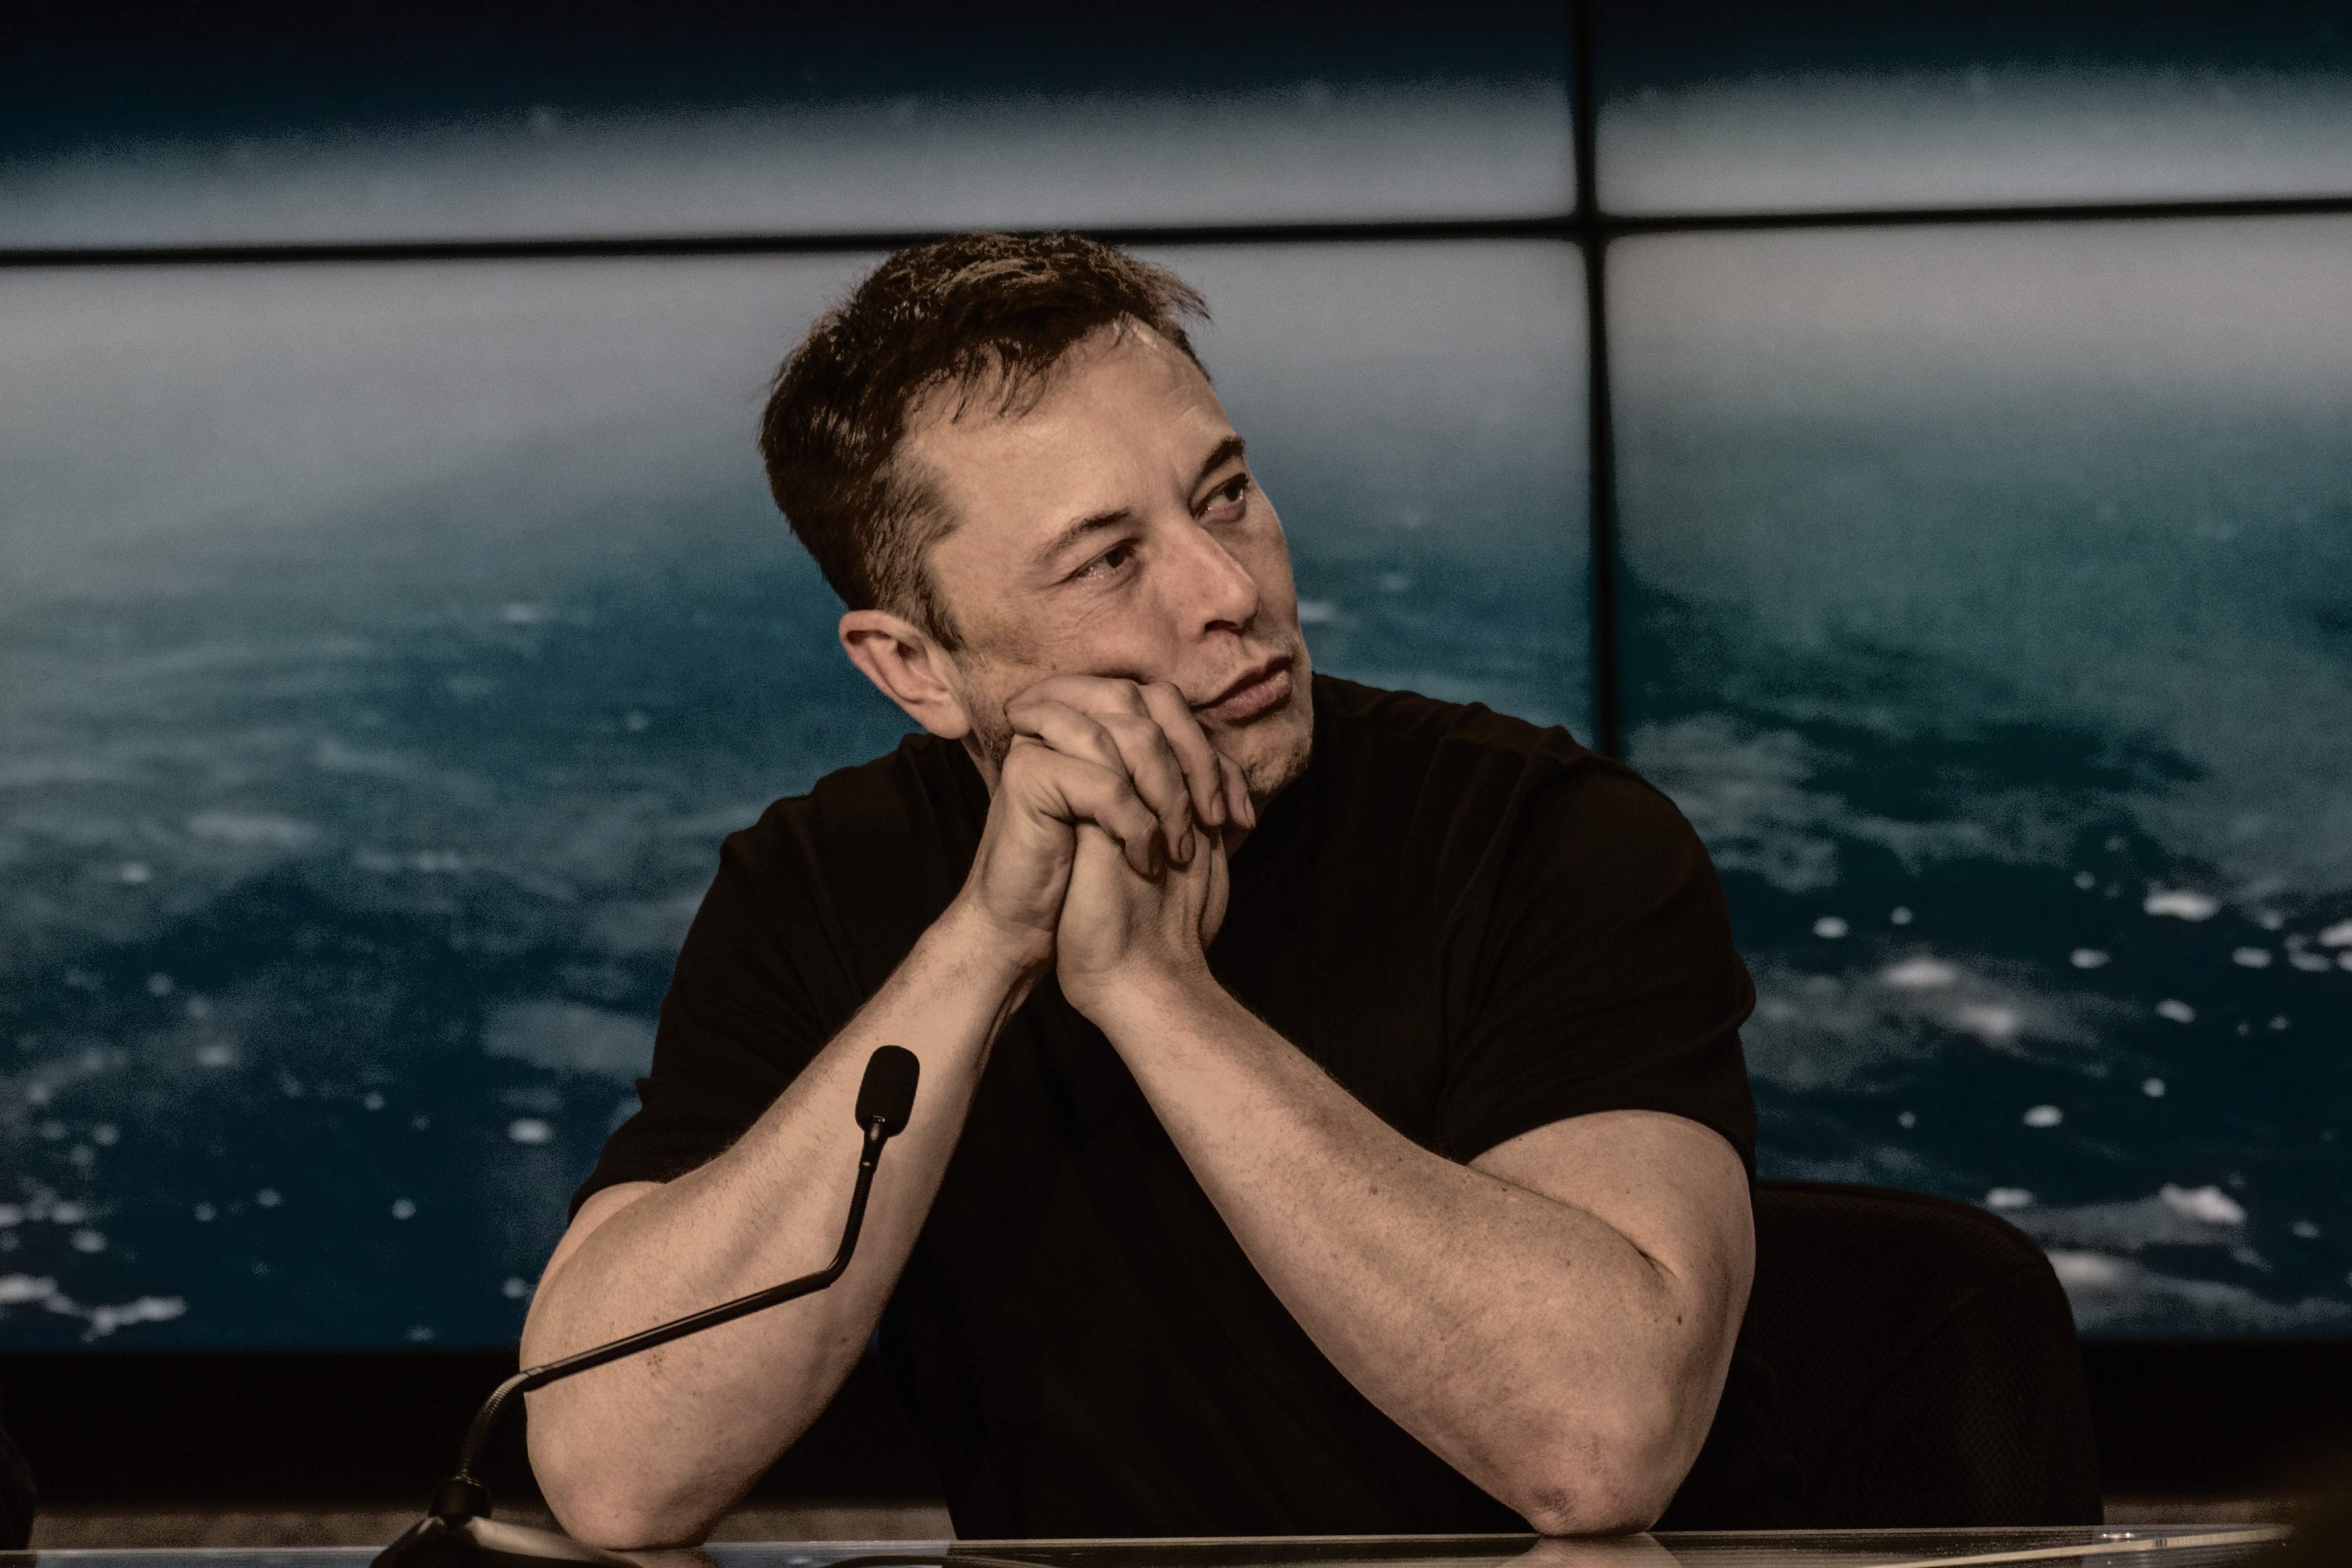 Elon Musk tried to negotiate a downgrade on the deal before agreeing to pay the $44 billion.